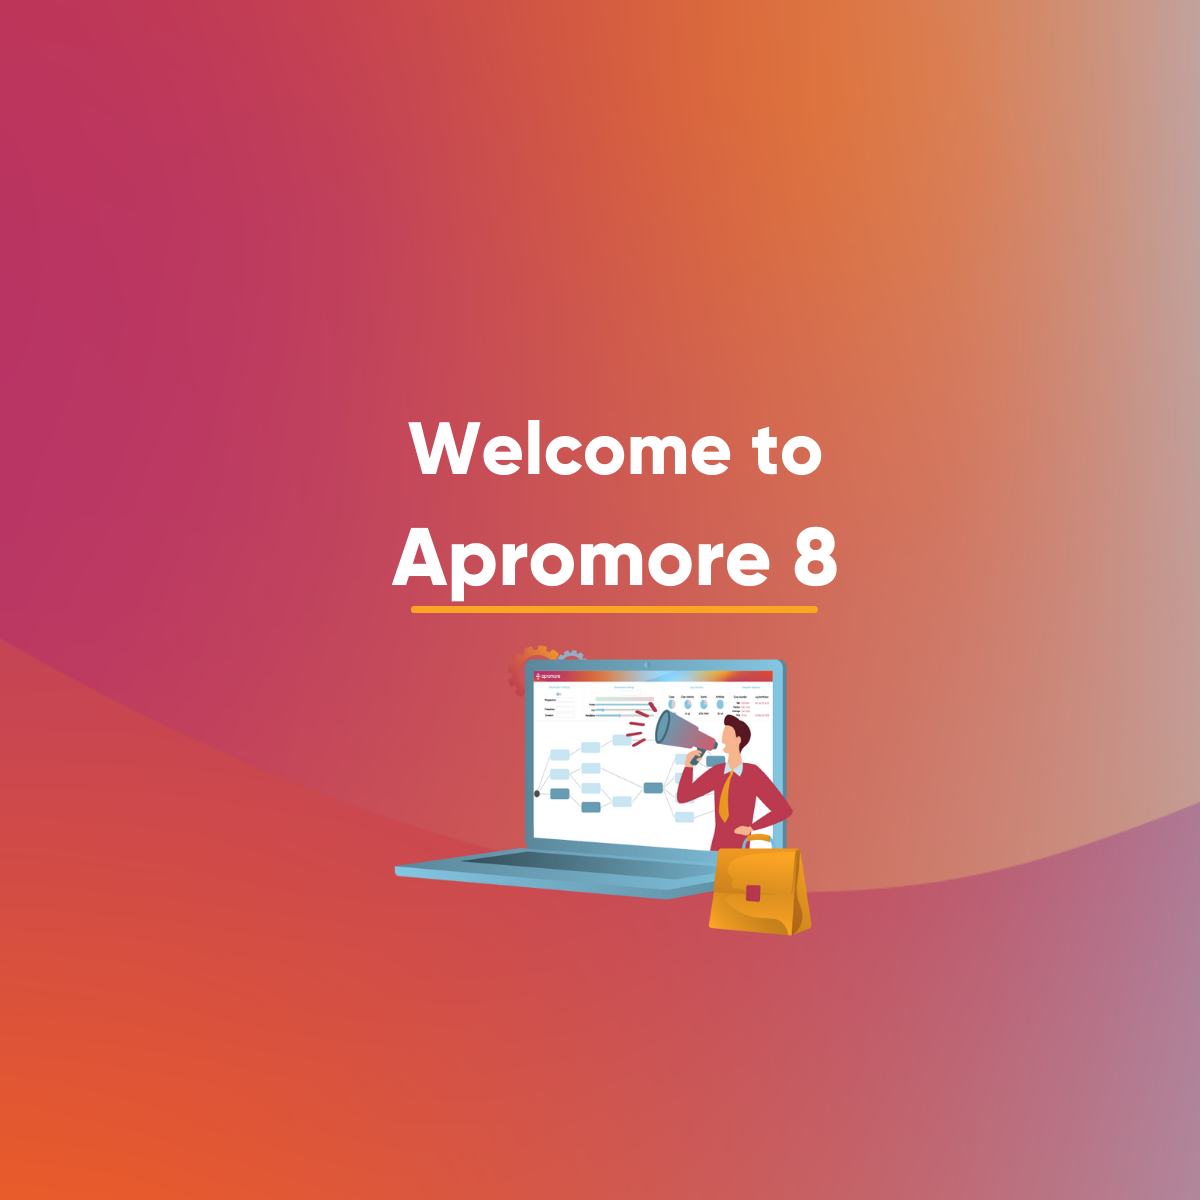 Apromore Process Mining Enterprise Edition 8 has launched!